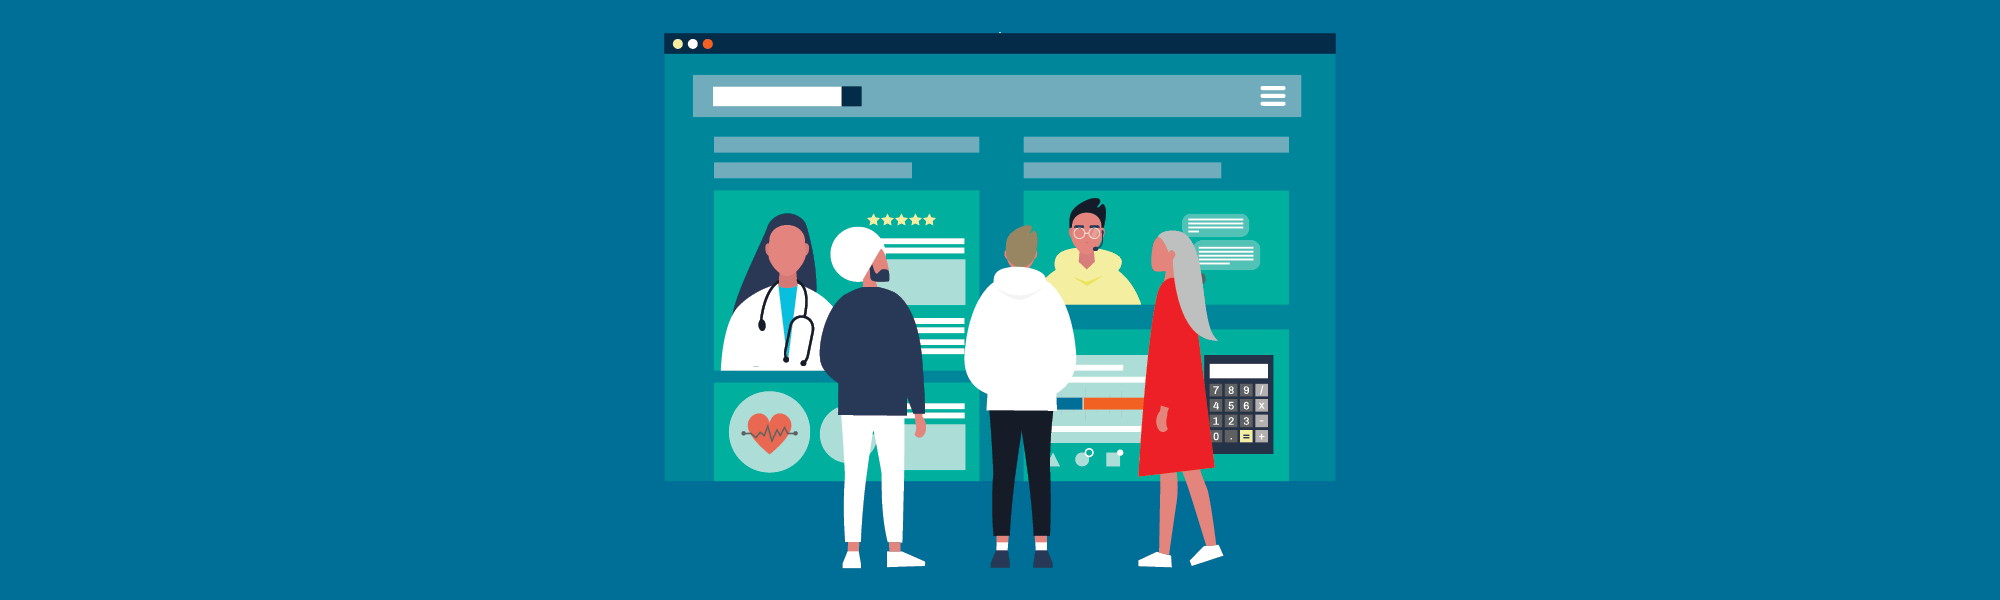 Illustration of patients interacting with health plan website